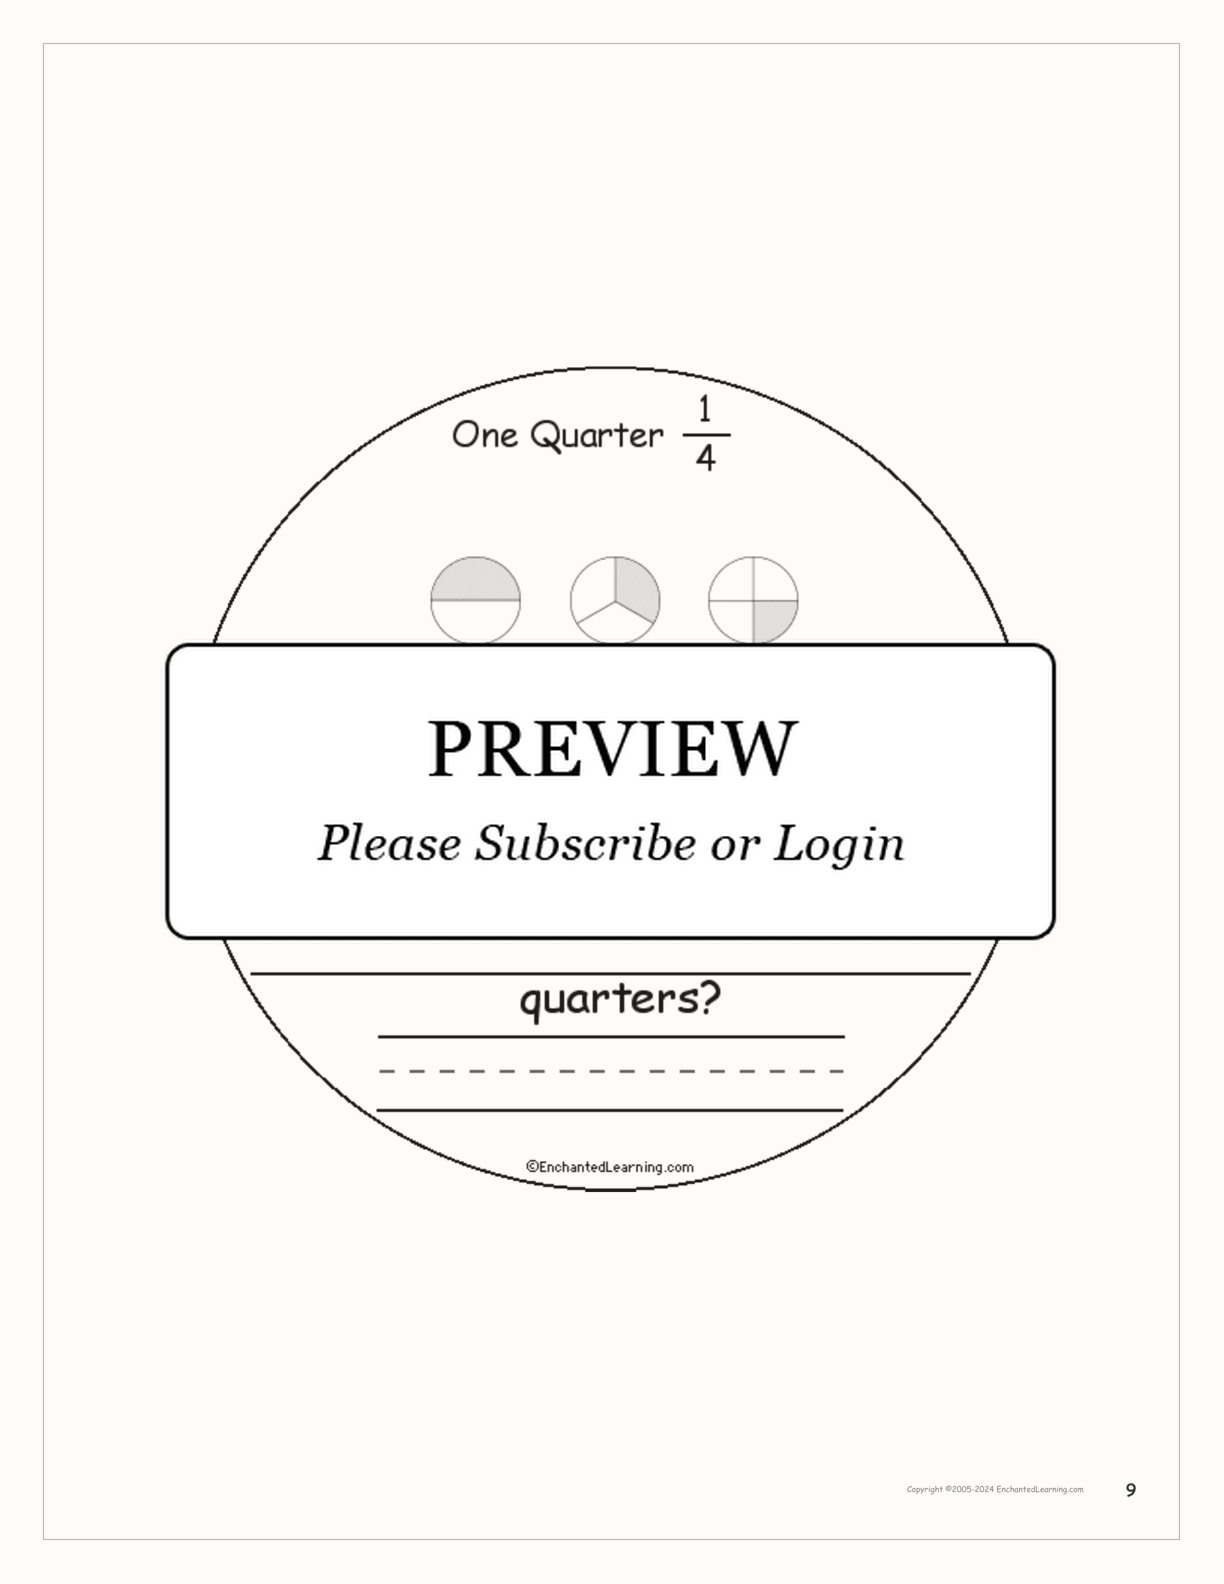 One Quarter: A Book on Fractions interactive printout page 9